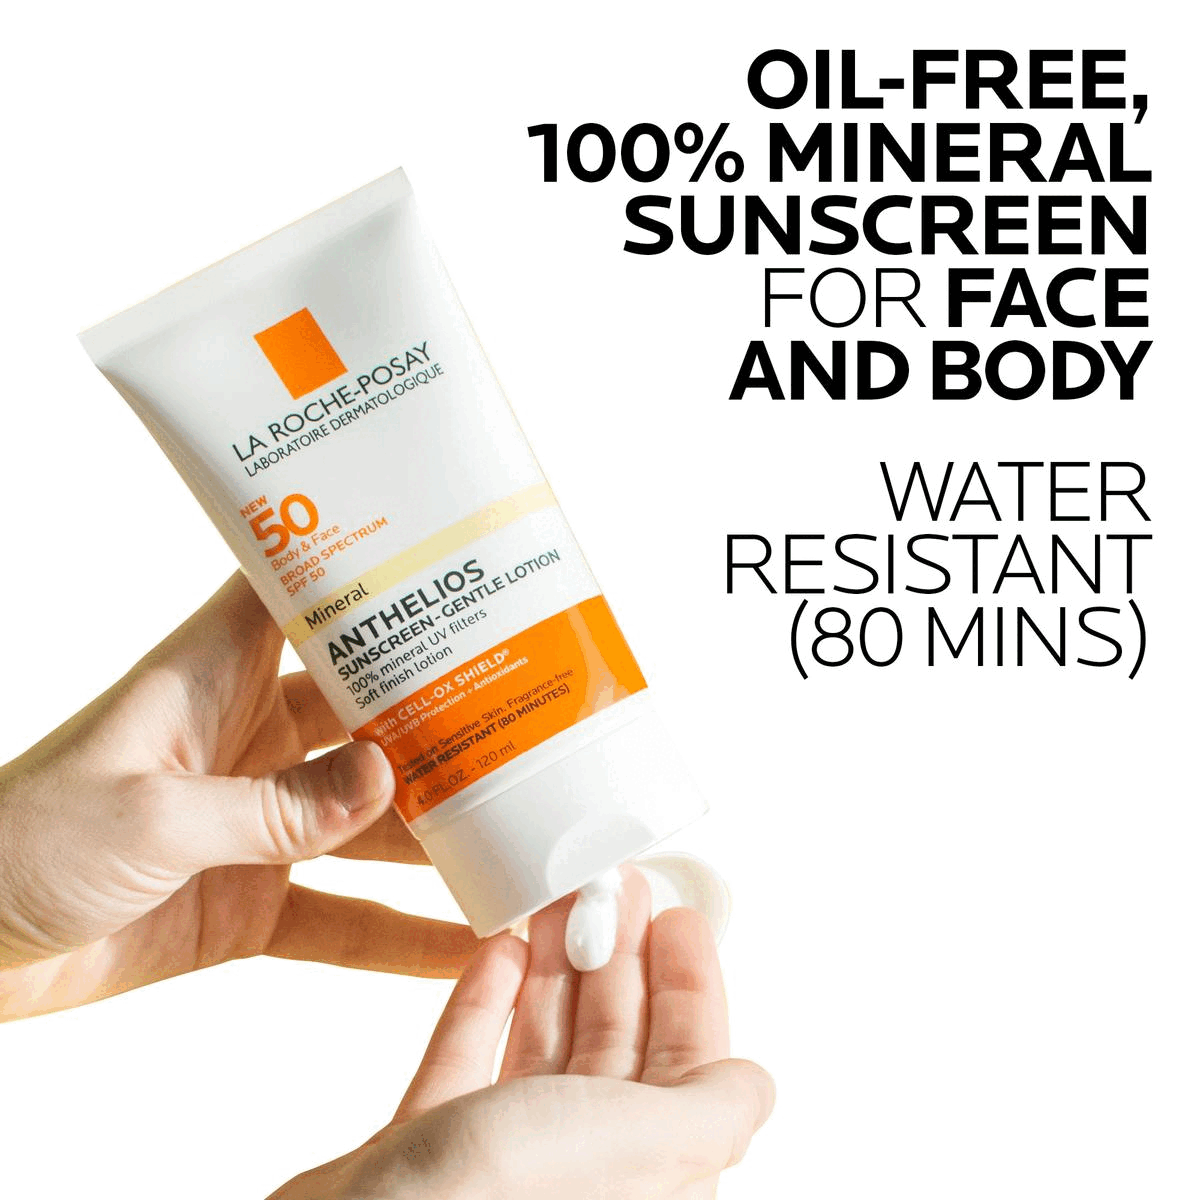 Image 1 -OIL-FREE, 100% MINERAL SUNSCREEN FOR FACE AND BODY WATER RESISTANT (80 MINS) Image 2 - CELL-OX SHIELD® TECHNOLOGY UVA/UVB PROTECTION + ANTIOXIDANTS BROAD SPECTRUM SPF 50 OXYBENZONE-FREE NON-GREASY, SOFT FINISH LOTION Image 3 - KEY DERMATOLOGICAL INGREDIENTS CELL-OX SHIELD® TECHNOLOGY UVA/UVB PROTECTION + ANTIOXIDANTS Photostable UVA/UVB filters and powerful antioxidant protection
            BROAD SPECTRUM SPF 50 100% MINERAL UV FILTERS Titanium Dioxide 5% Zinc Oxide 15%
            SILICA LIGHTWEIGHT POWDER Helps absorb excess oil and reduce the appearance of shine Image 4 - DERMATOLOGIST RECOMMENDED 